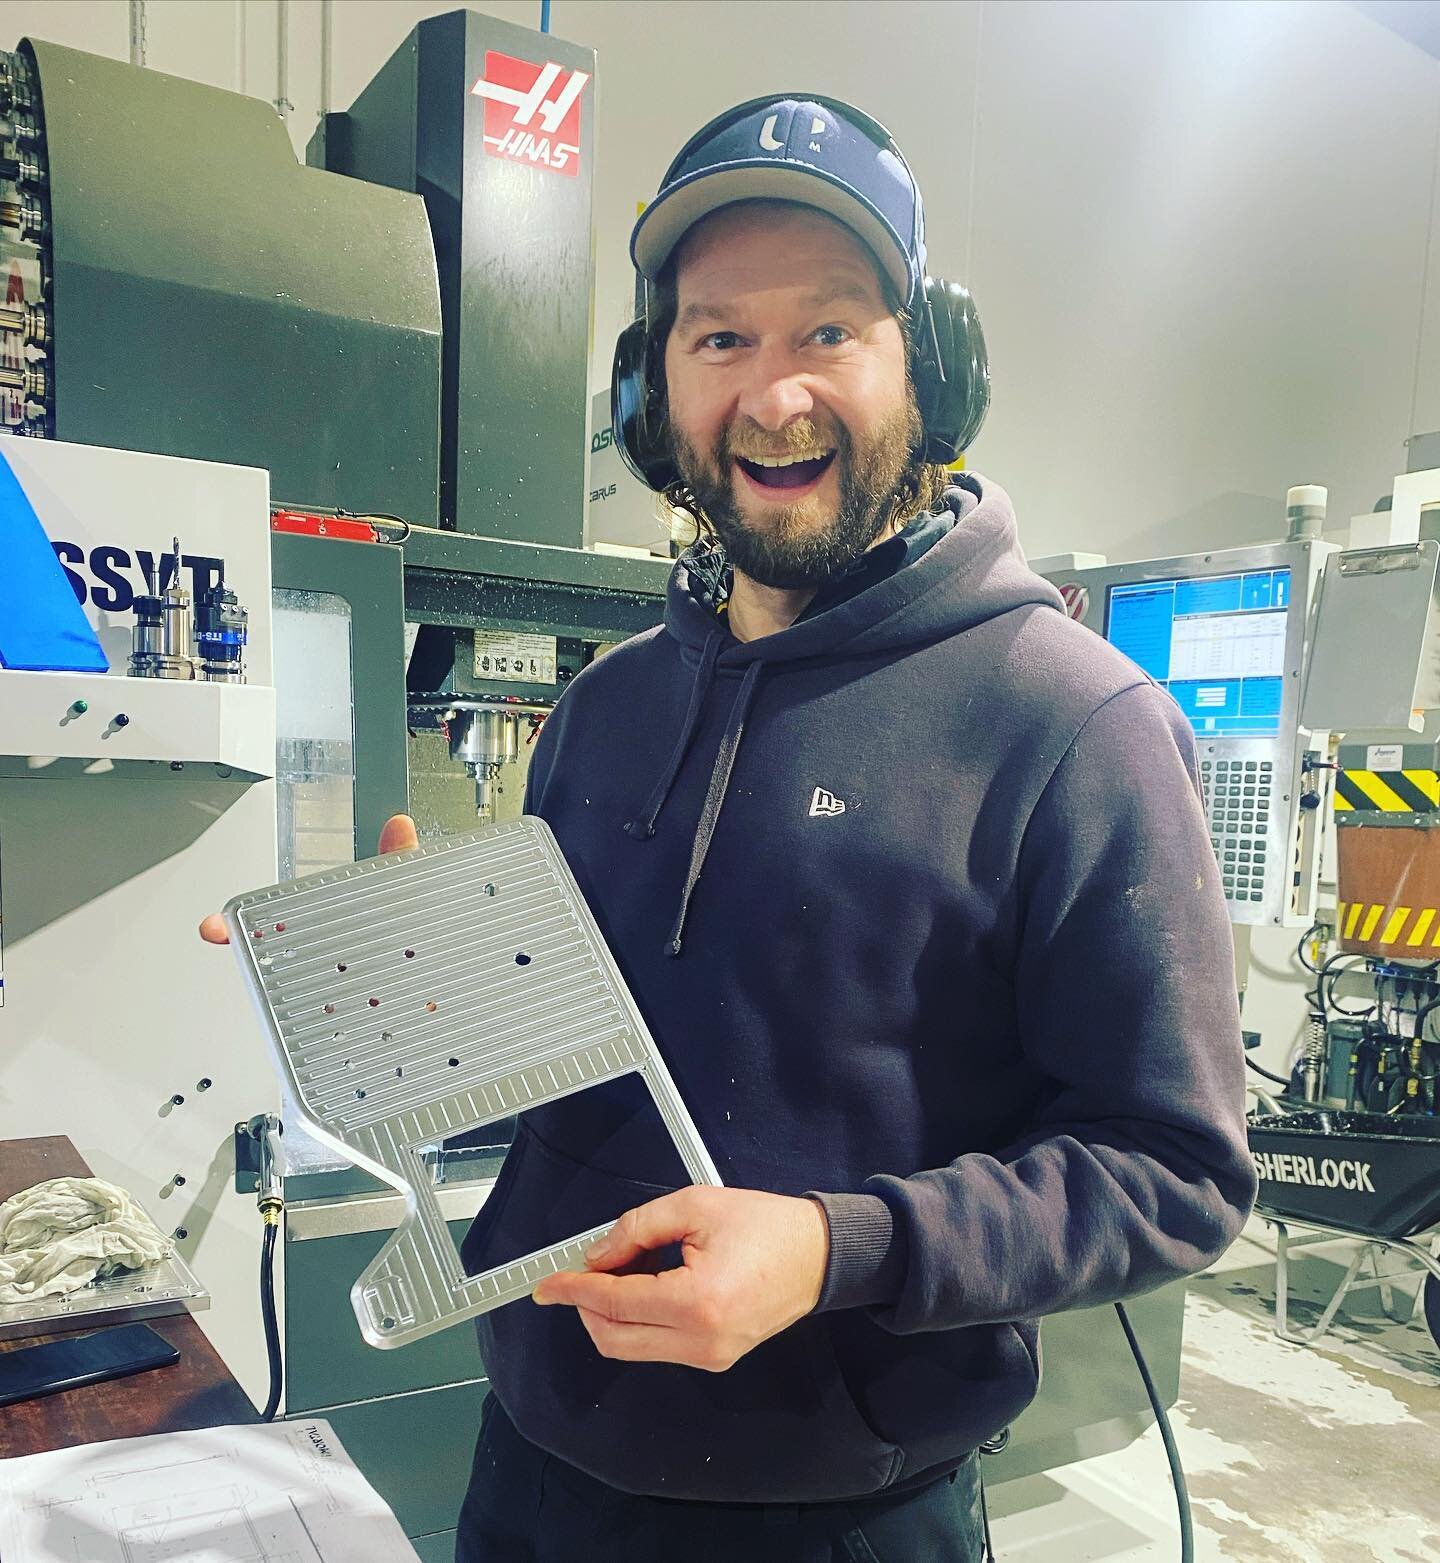 We let Boss Man out of his programming and projects box and onto the tools for a few days when Mike was away - he&rsquo;s still got it! #cncmachining #manufacturing #madeinnz